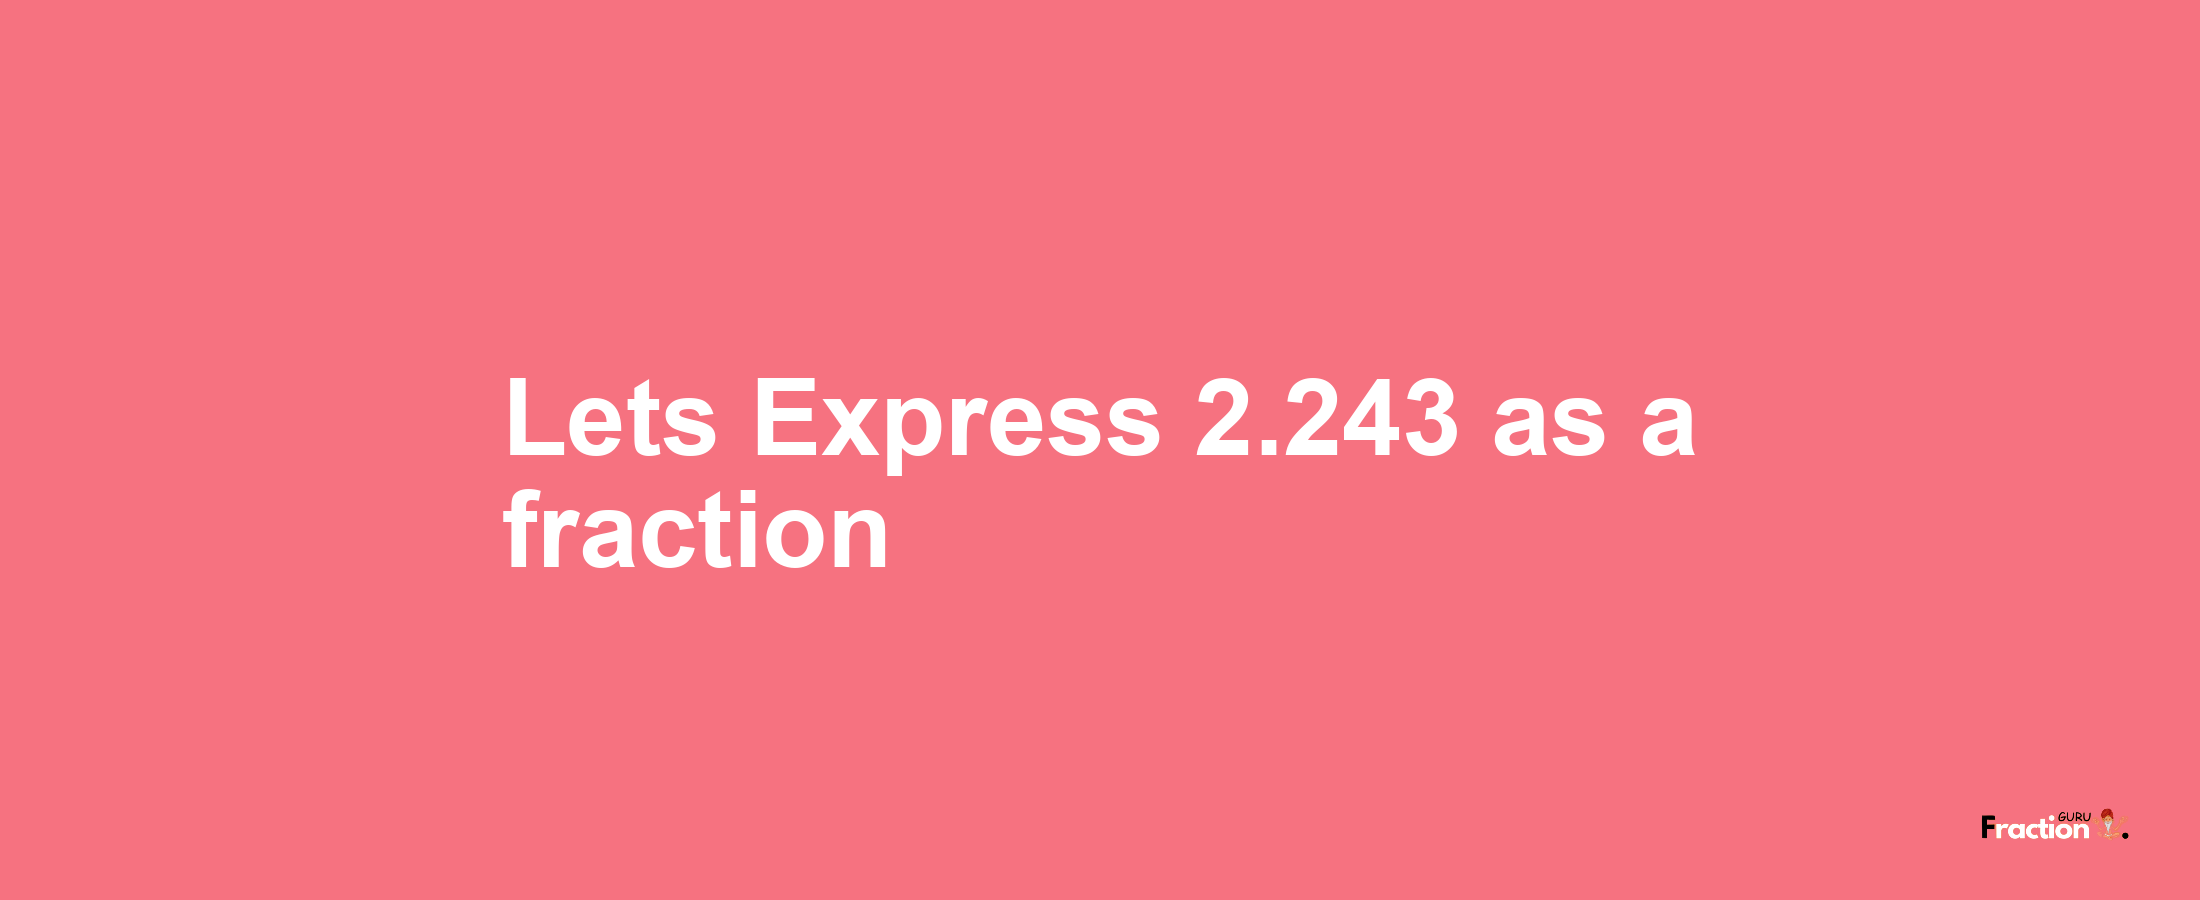 Lets Express 2.243 as afraction